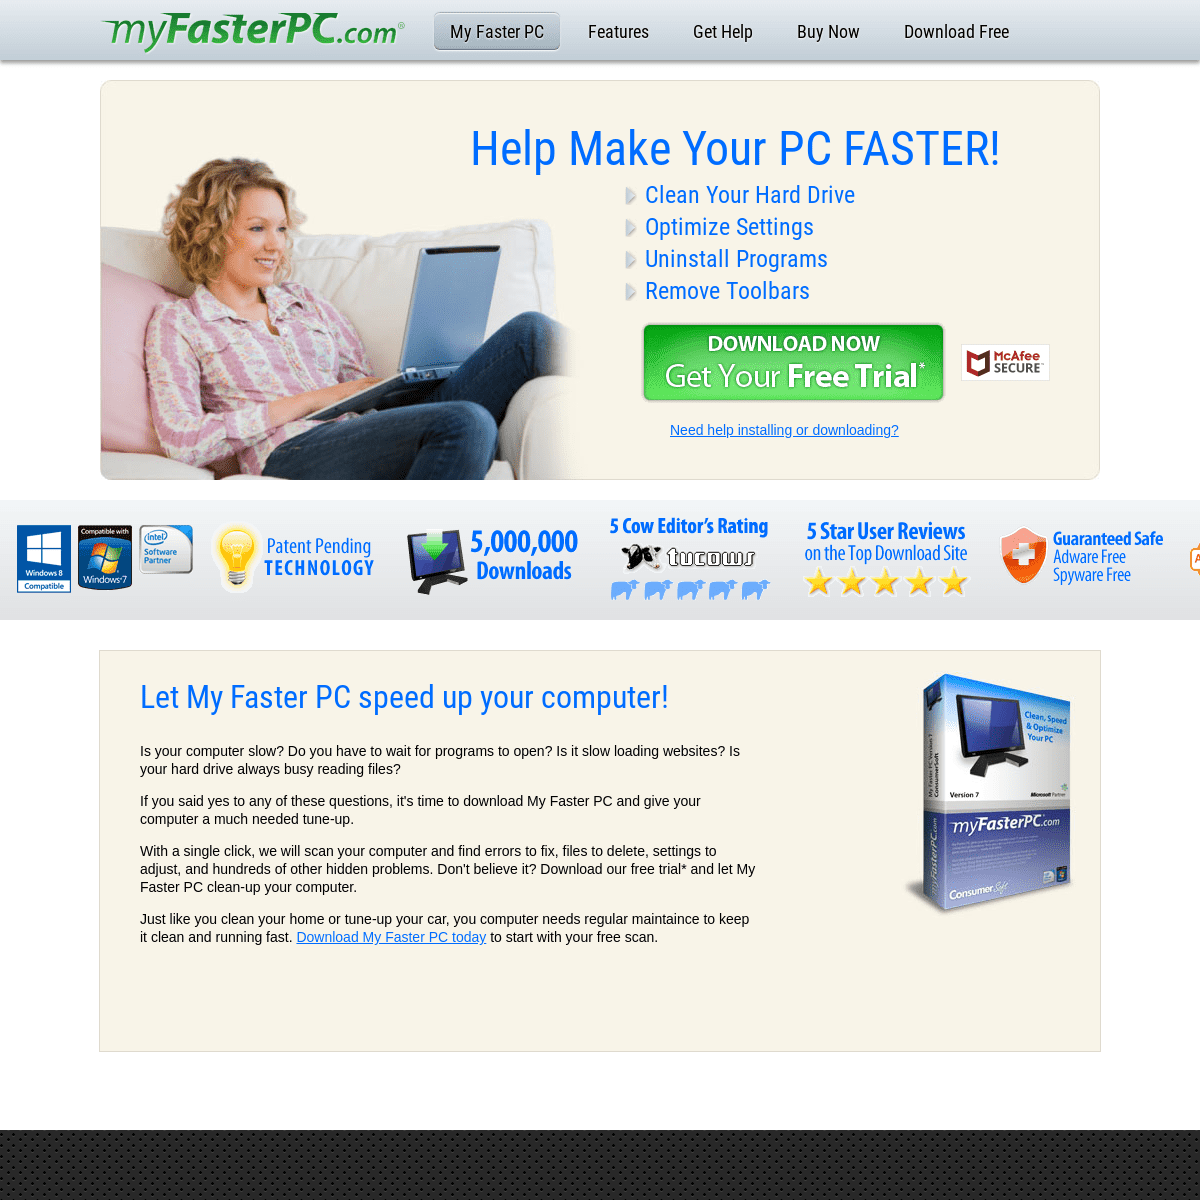 A complete backup of myfasterpc.com